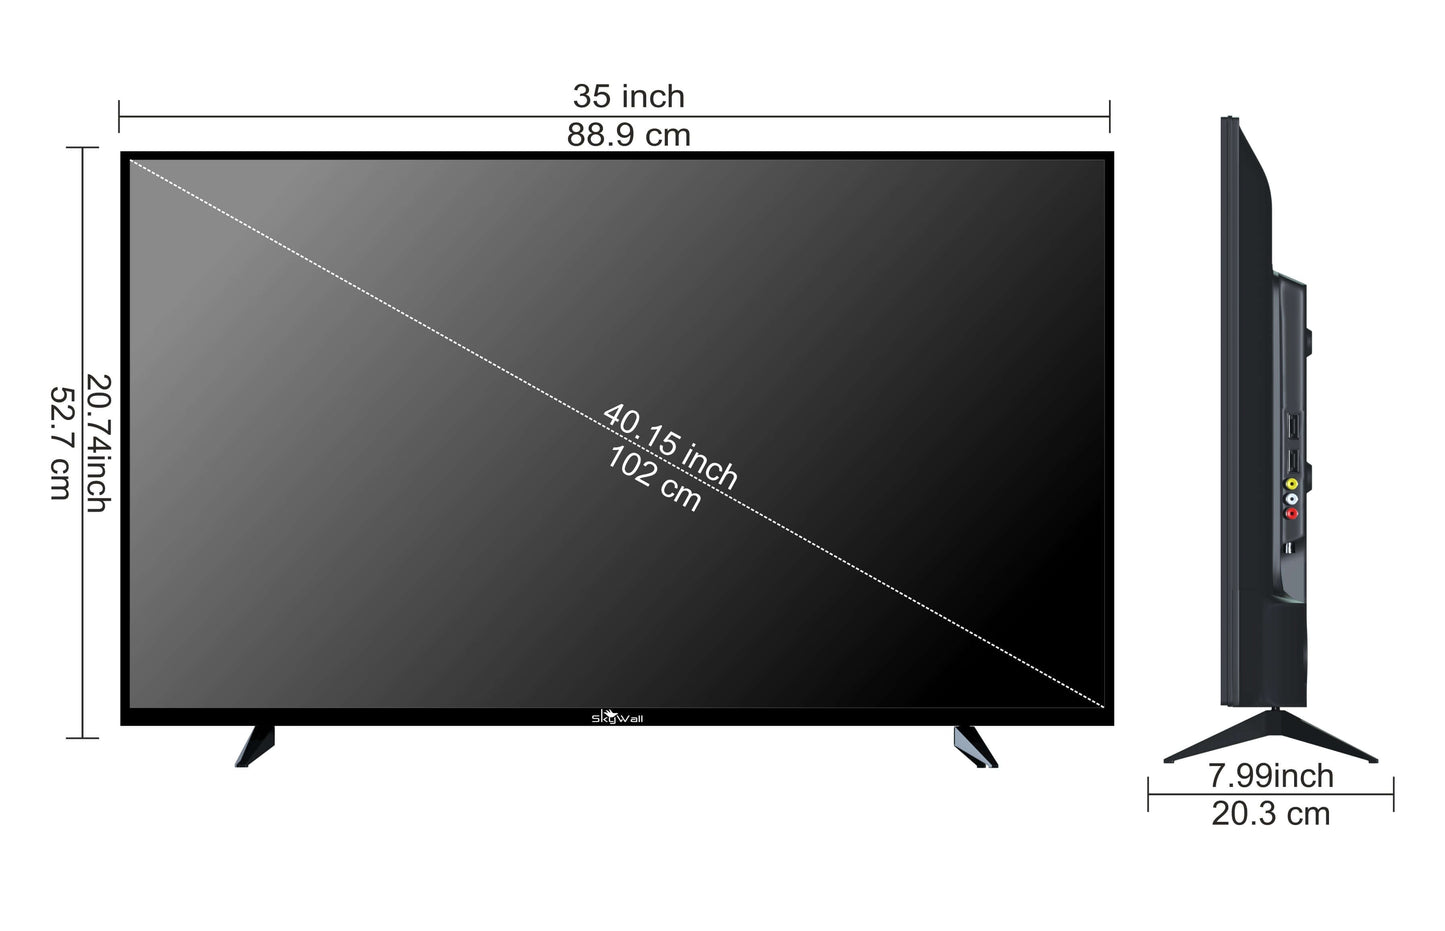 SkyWall™ TV Full HD TV SkyWall 102 cm (40 inches) Full HD Smart LED TV 40SWRR With Black (Frameless Edition) (Dolby Audio)